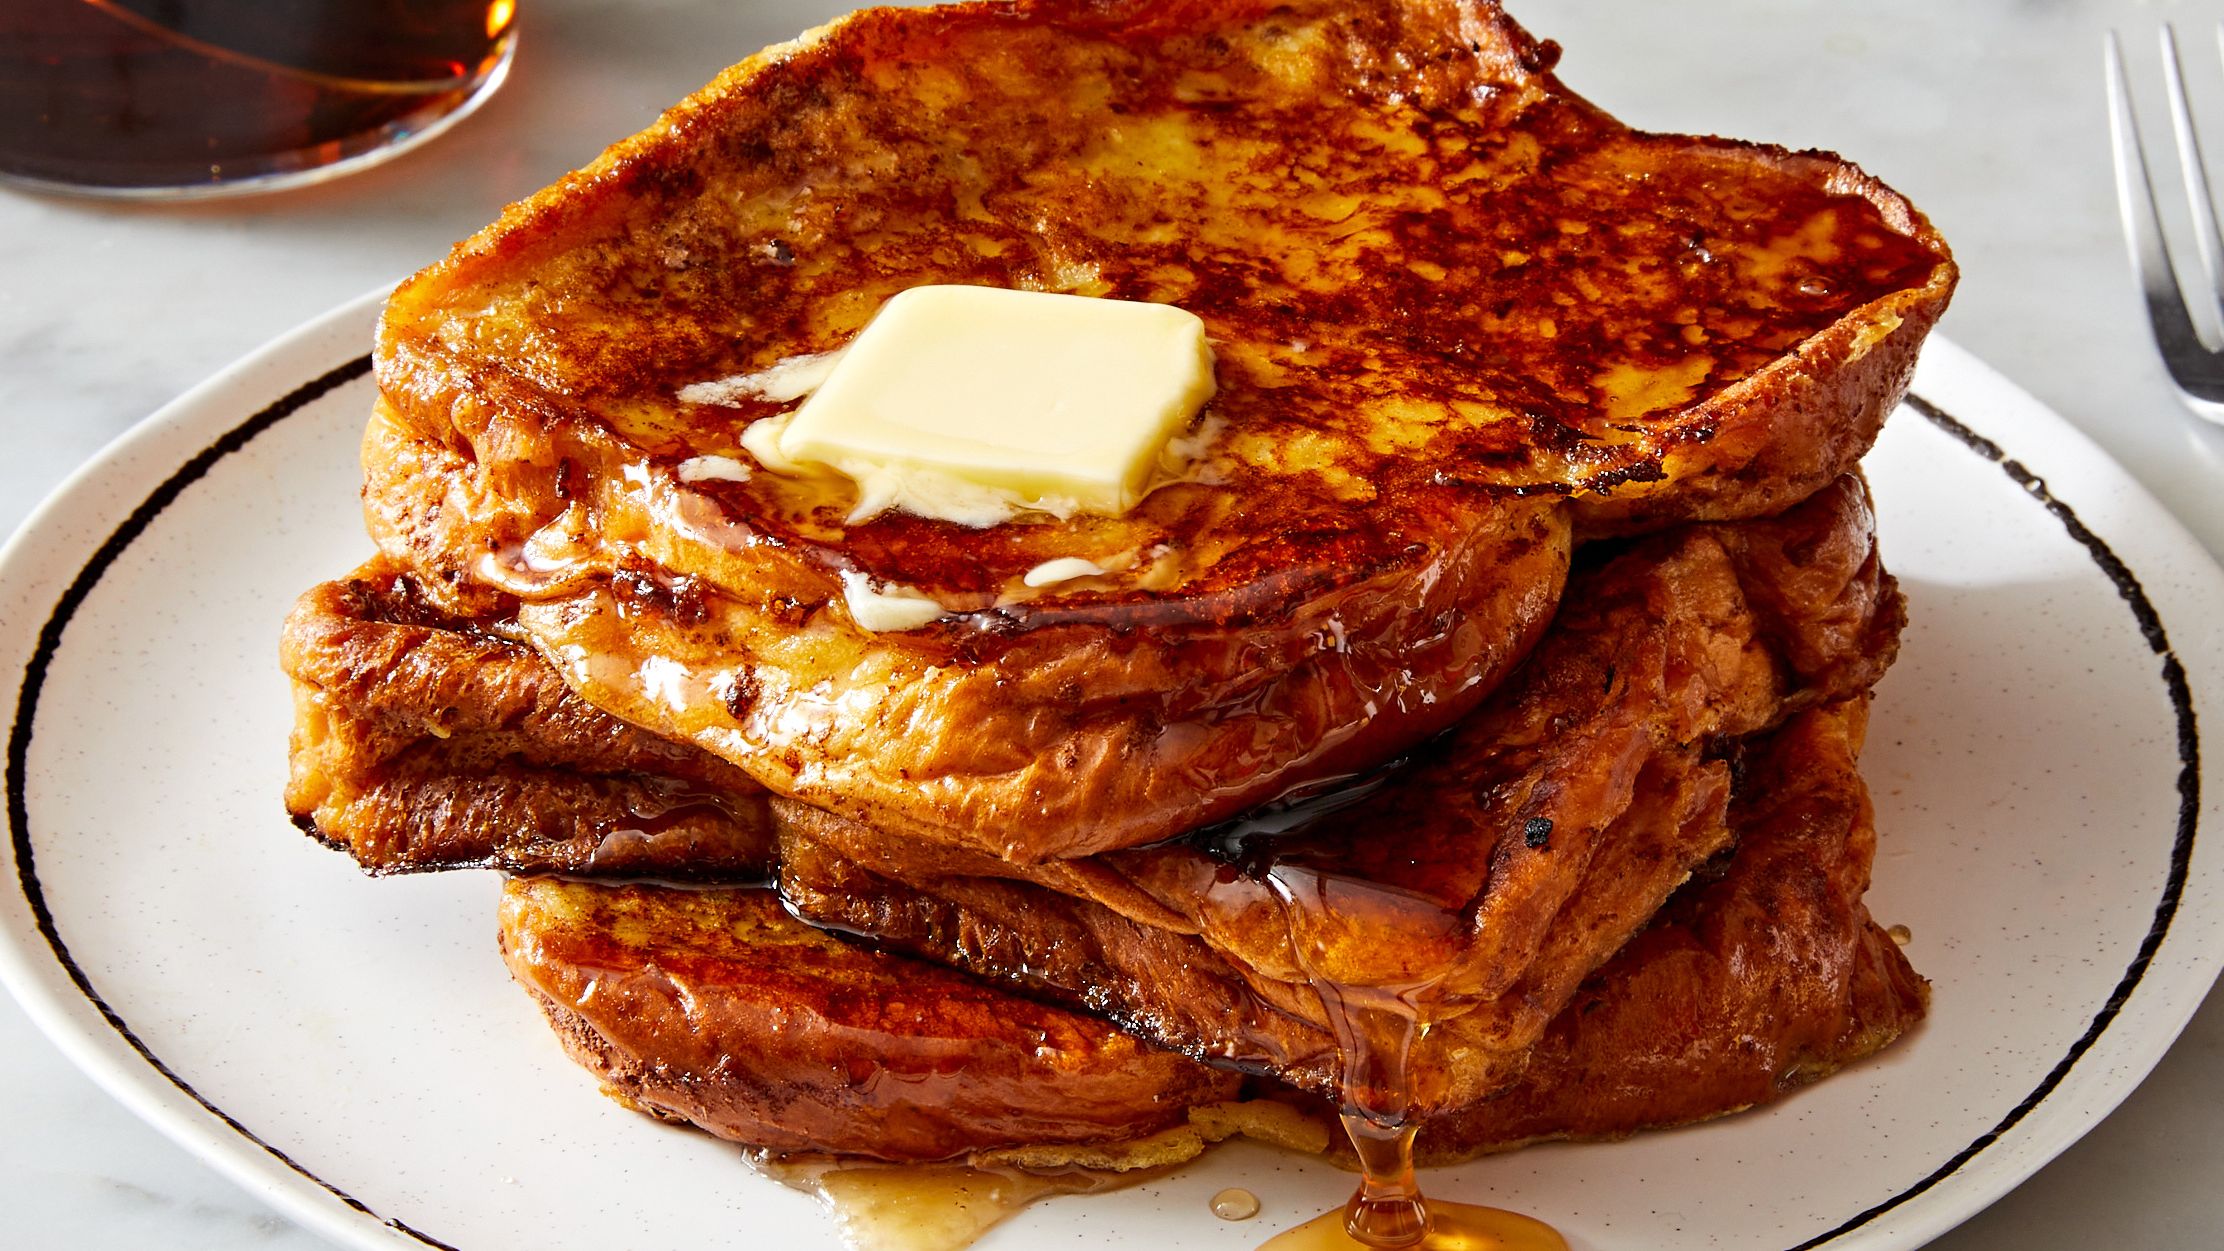 https://hips.hearstapps.com/hmg-prod/images/delish-230308-french-toast-055-rv-index-641c84040274d.jpg?crop=0.8896xw:1xh;center,top